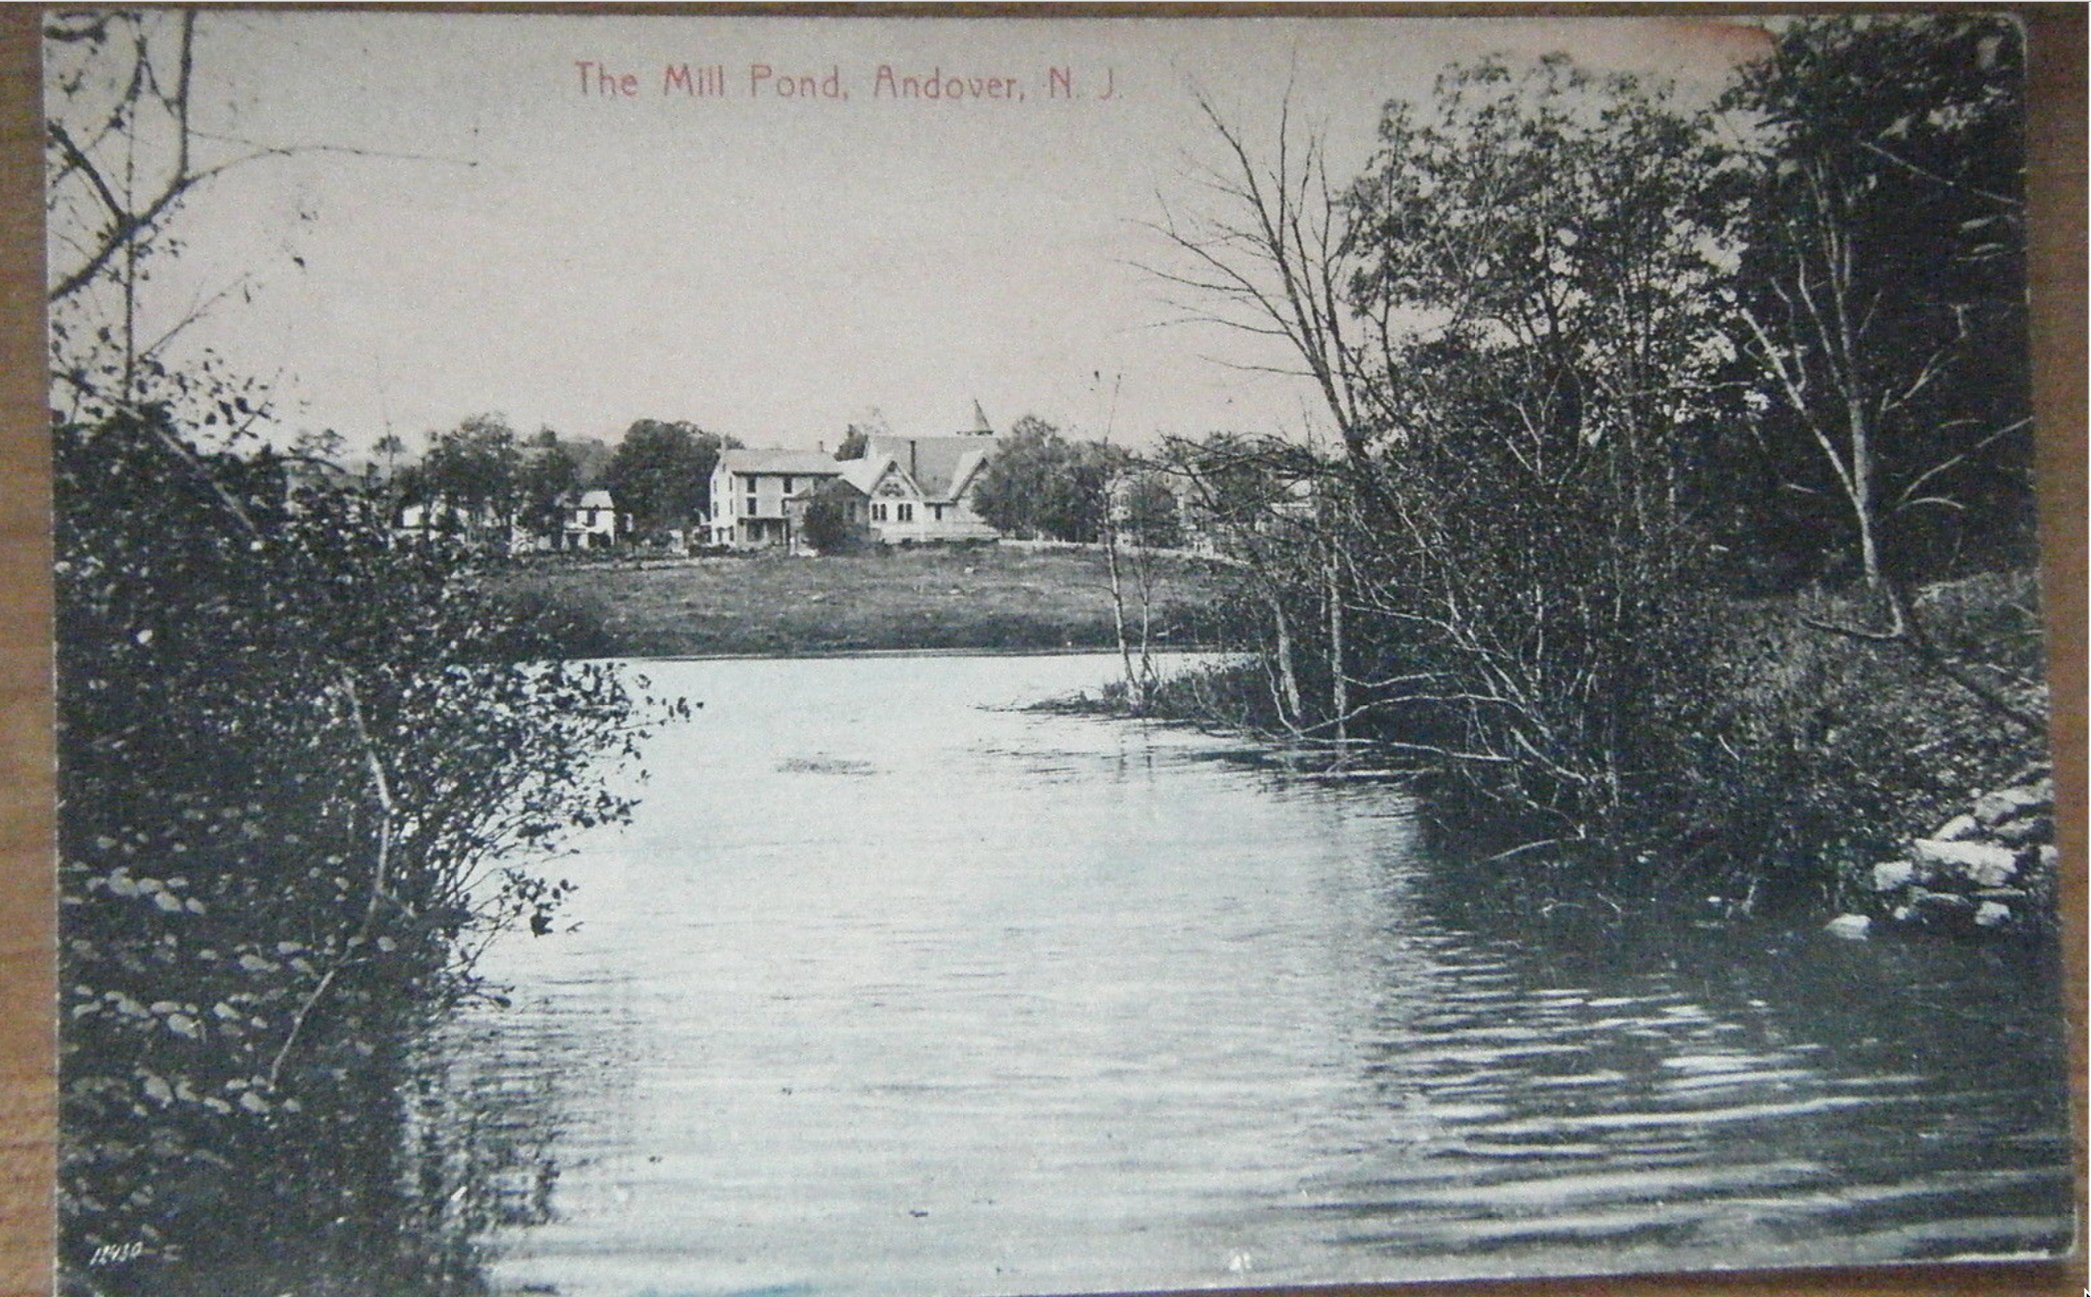 Andover - The Mill Pond - c 1910